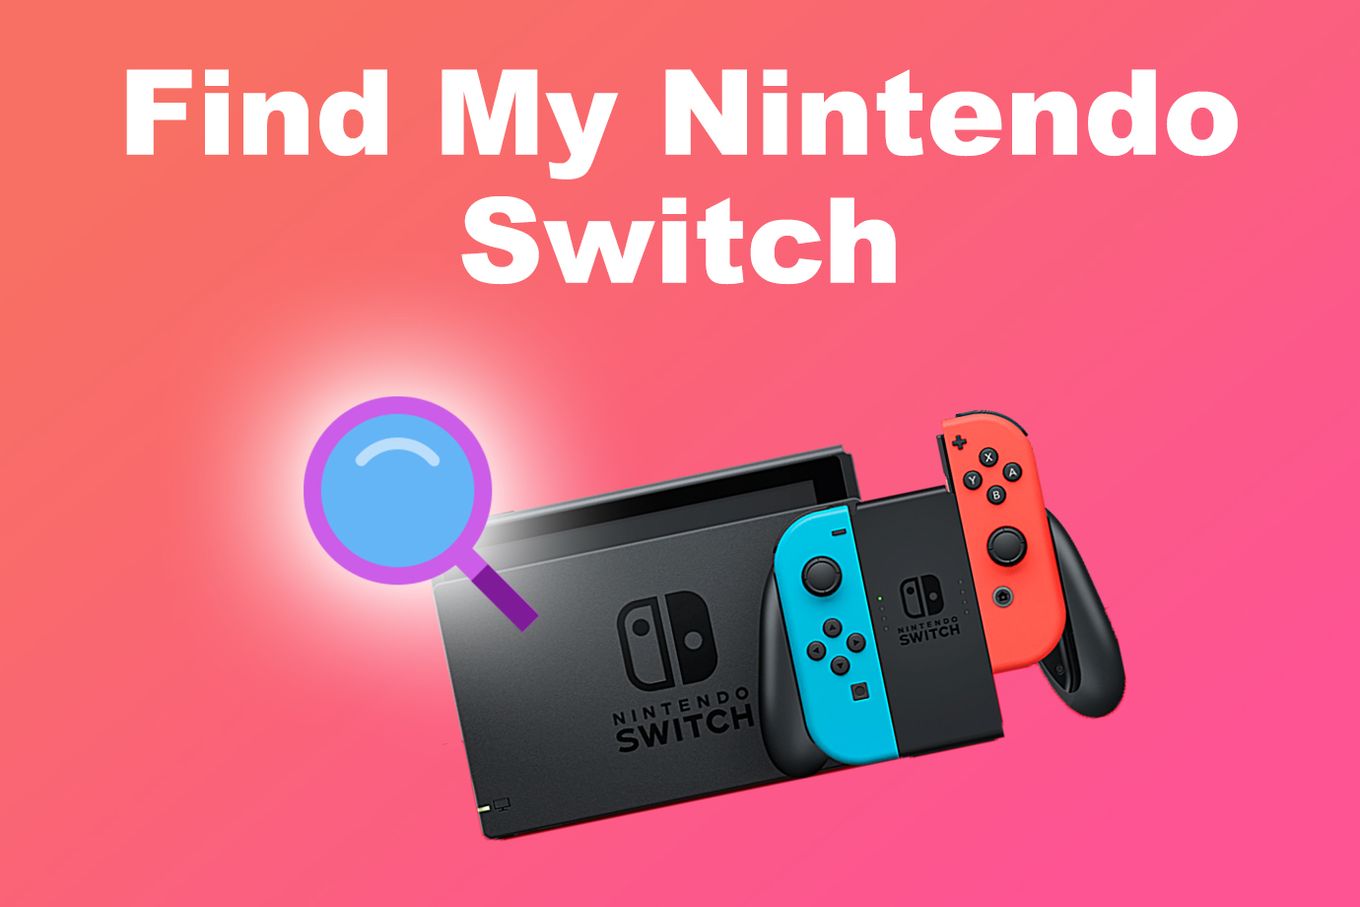 Switch owner? Go enable two-factor authentication for your Nintendo account